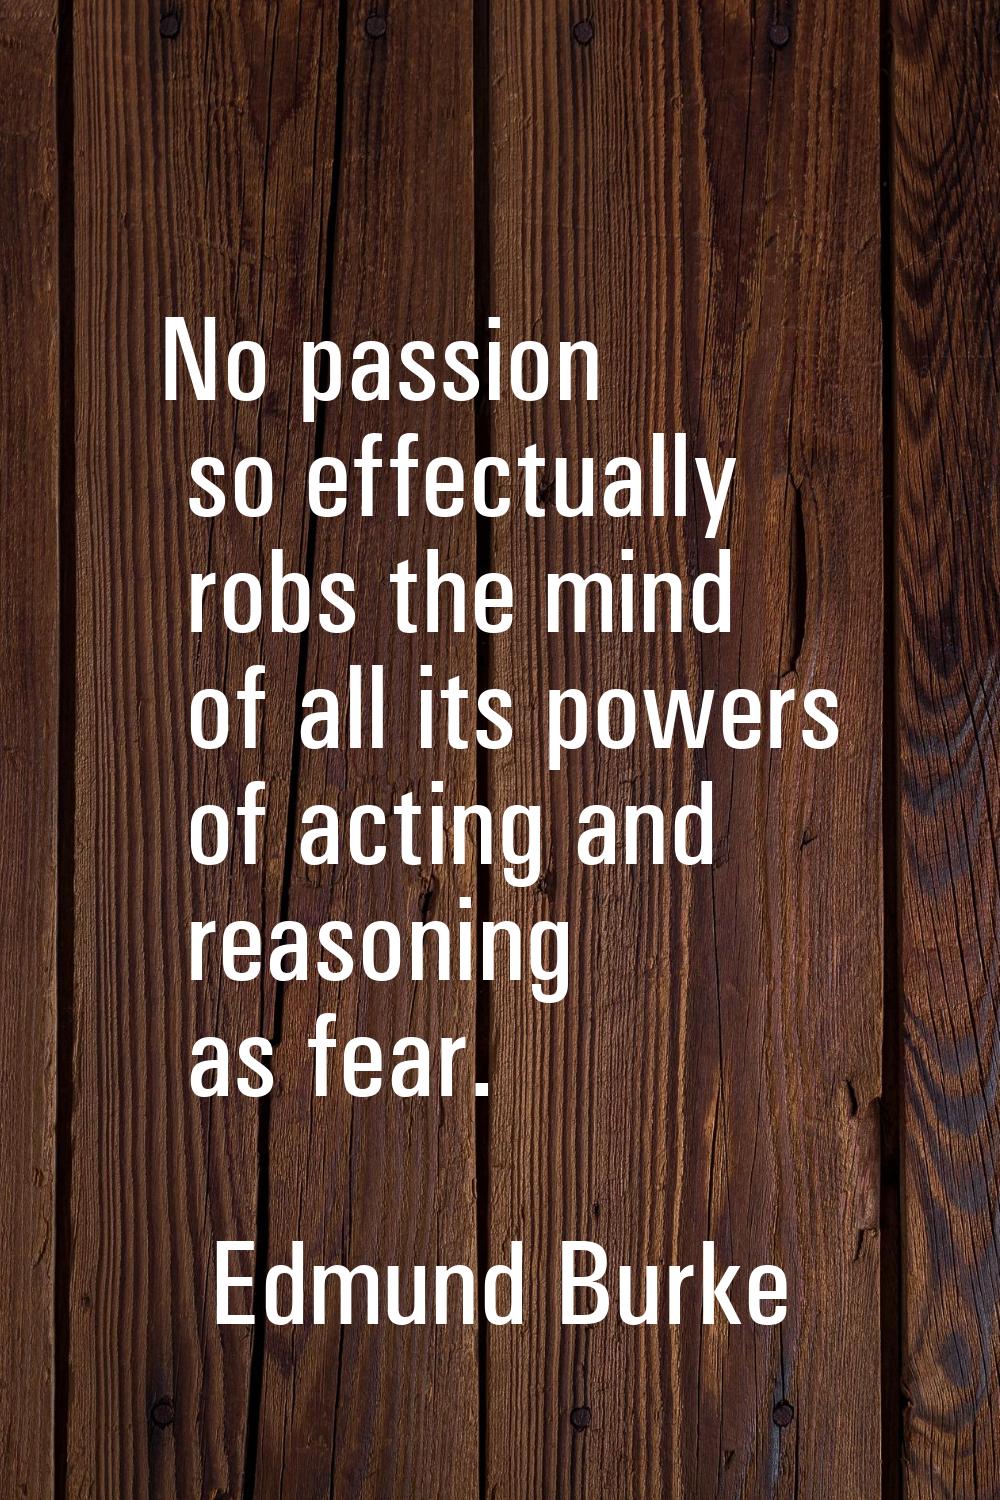 No passion so effectually robs the mind of all its powers of acting and reasoning as fear.